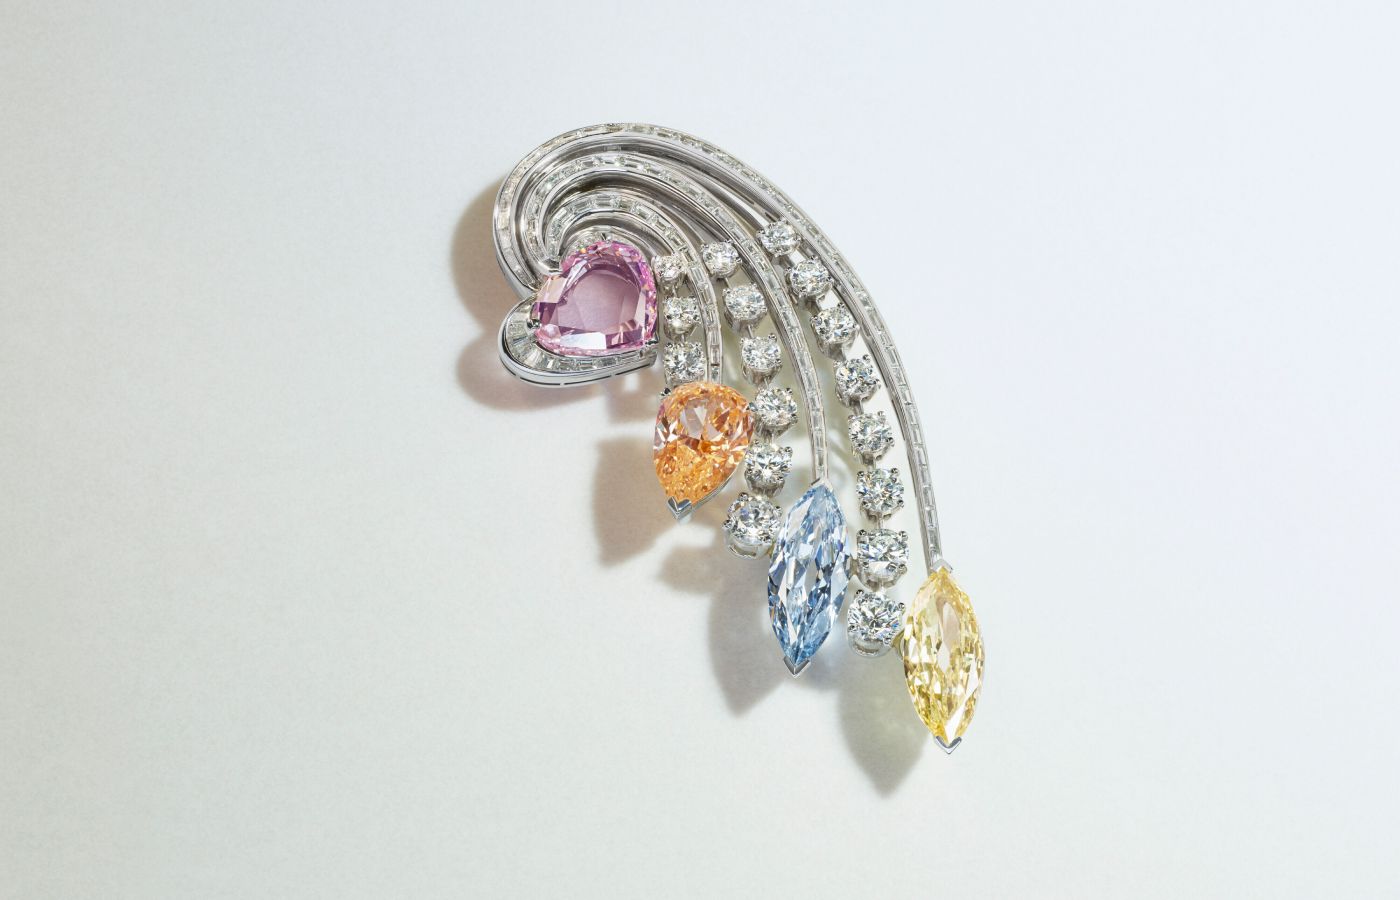 Bulgari brooch with a fancy intense orange pear brilliant-cut diamond of 5.14 carats, fancy intense purple-pink modified heart portrait-cut diamond of 5.00 carats, fancy blue marquise brilliant-cut diamond of 4.26 carats, fancy intense yellow marquise brilliant-cut diamond of 3.82 carats, baguette-cut and round diamonds, platinum and 18k white gold (Lot 88) – Included in the Christie’s The World of Heidi Horten: Magnificent Jewels Part I auction